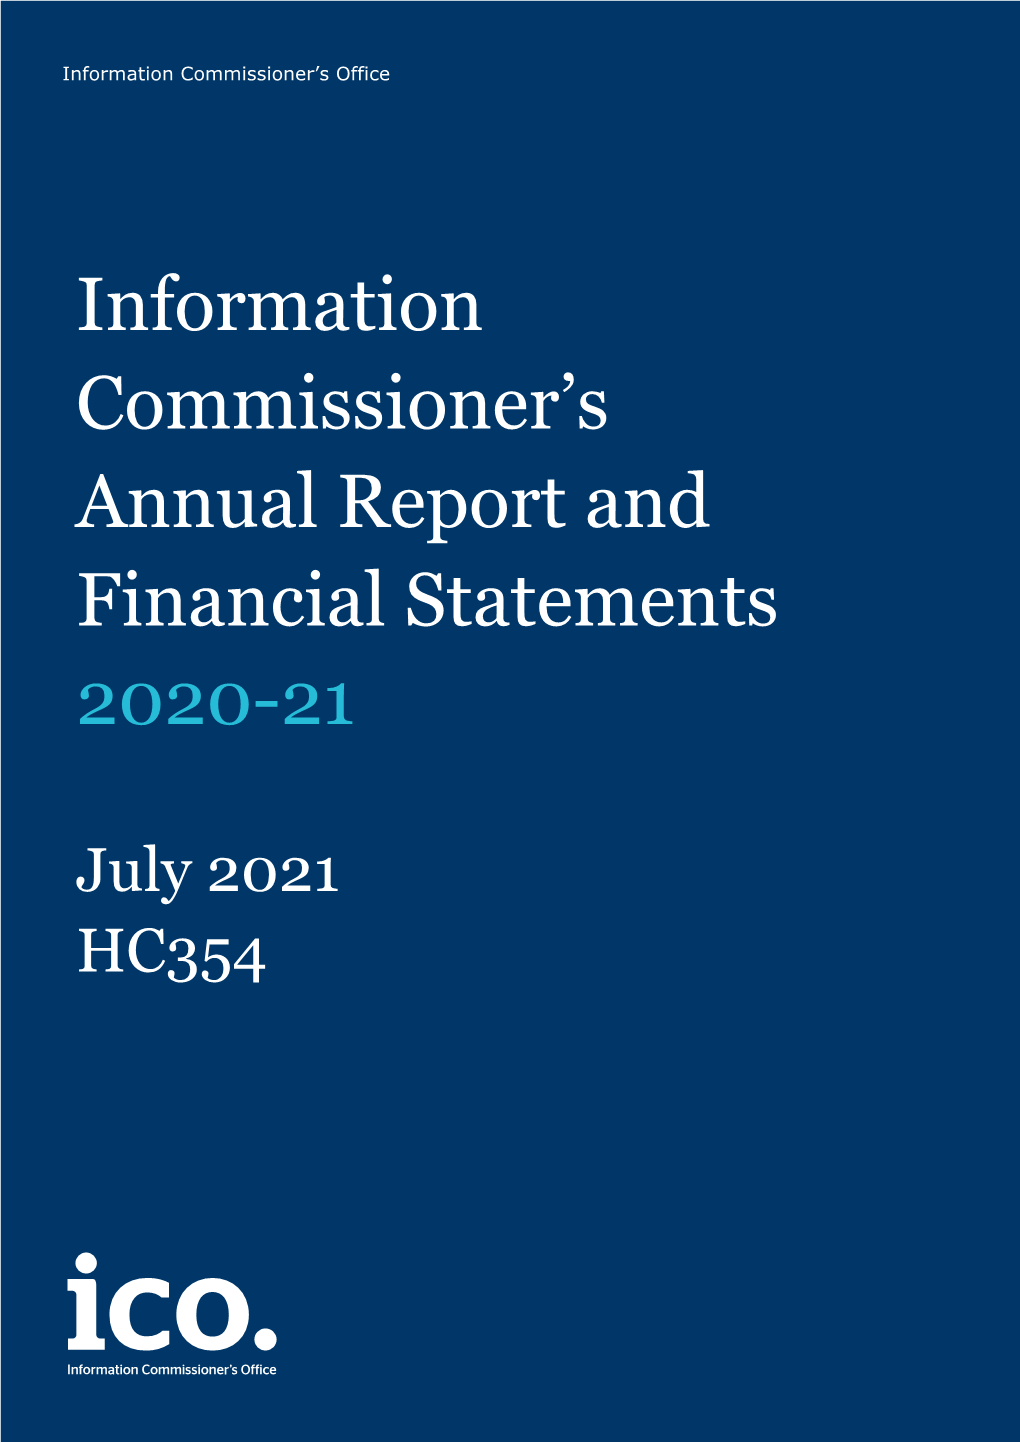 Information Commissioner's Annual Report and Financial Statements